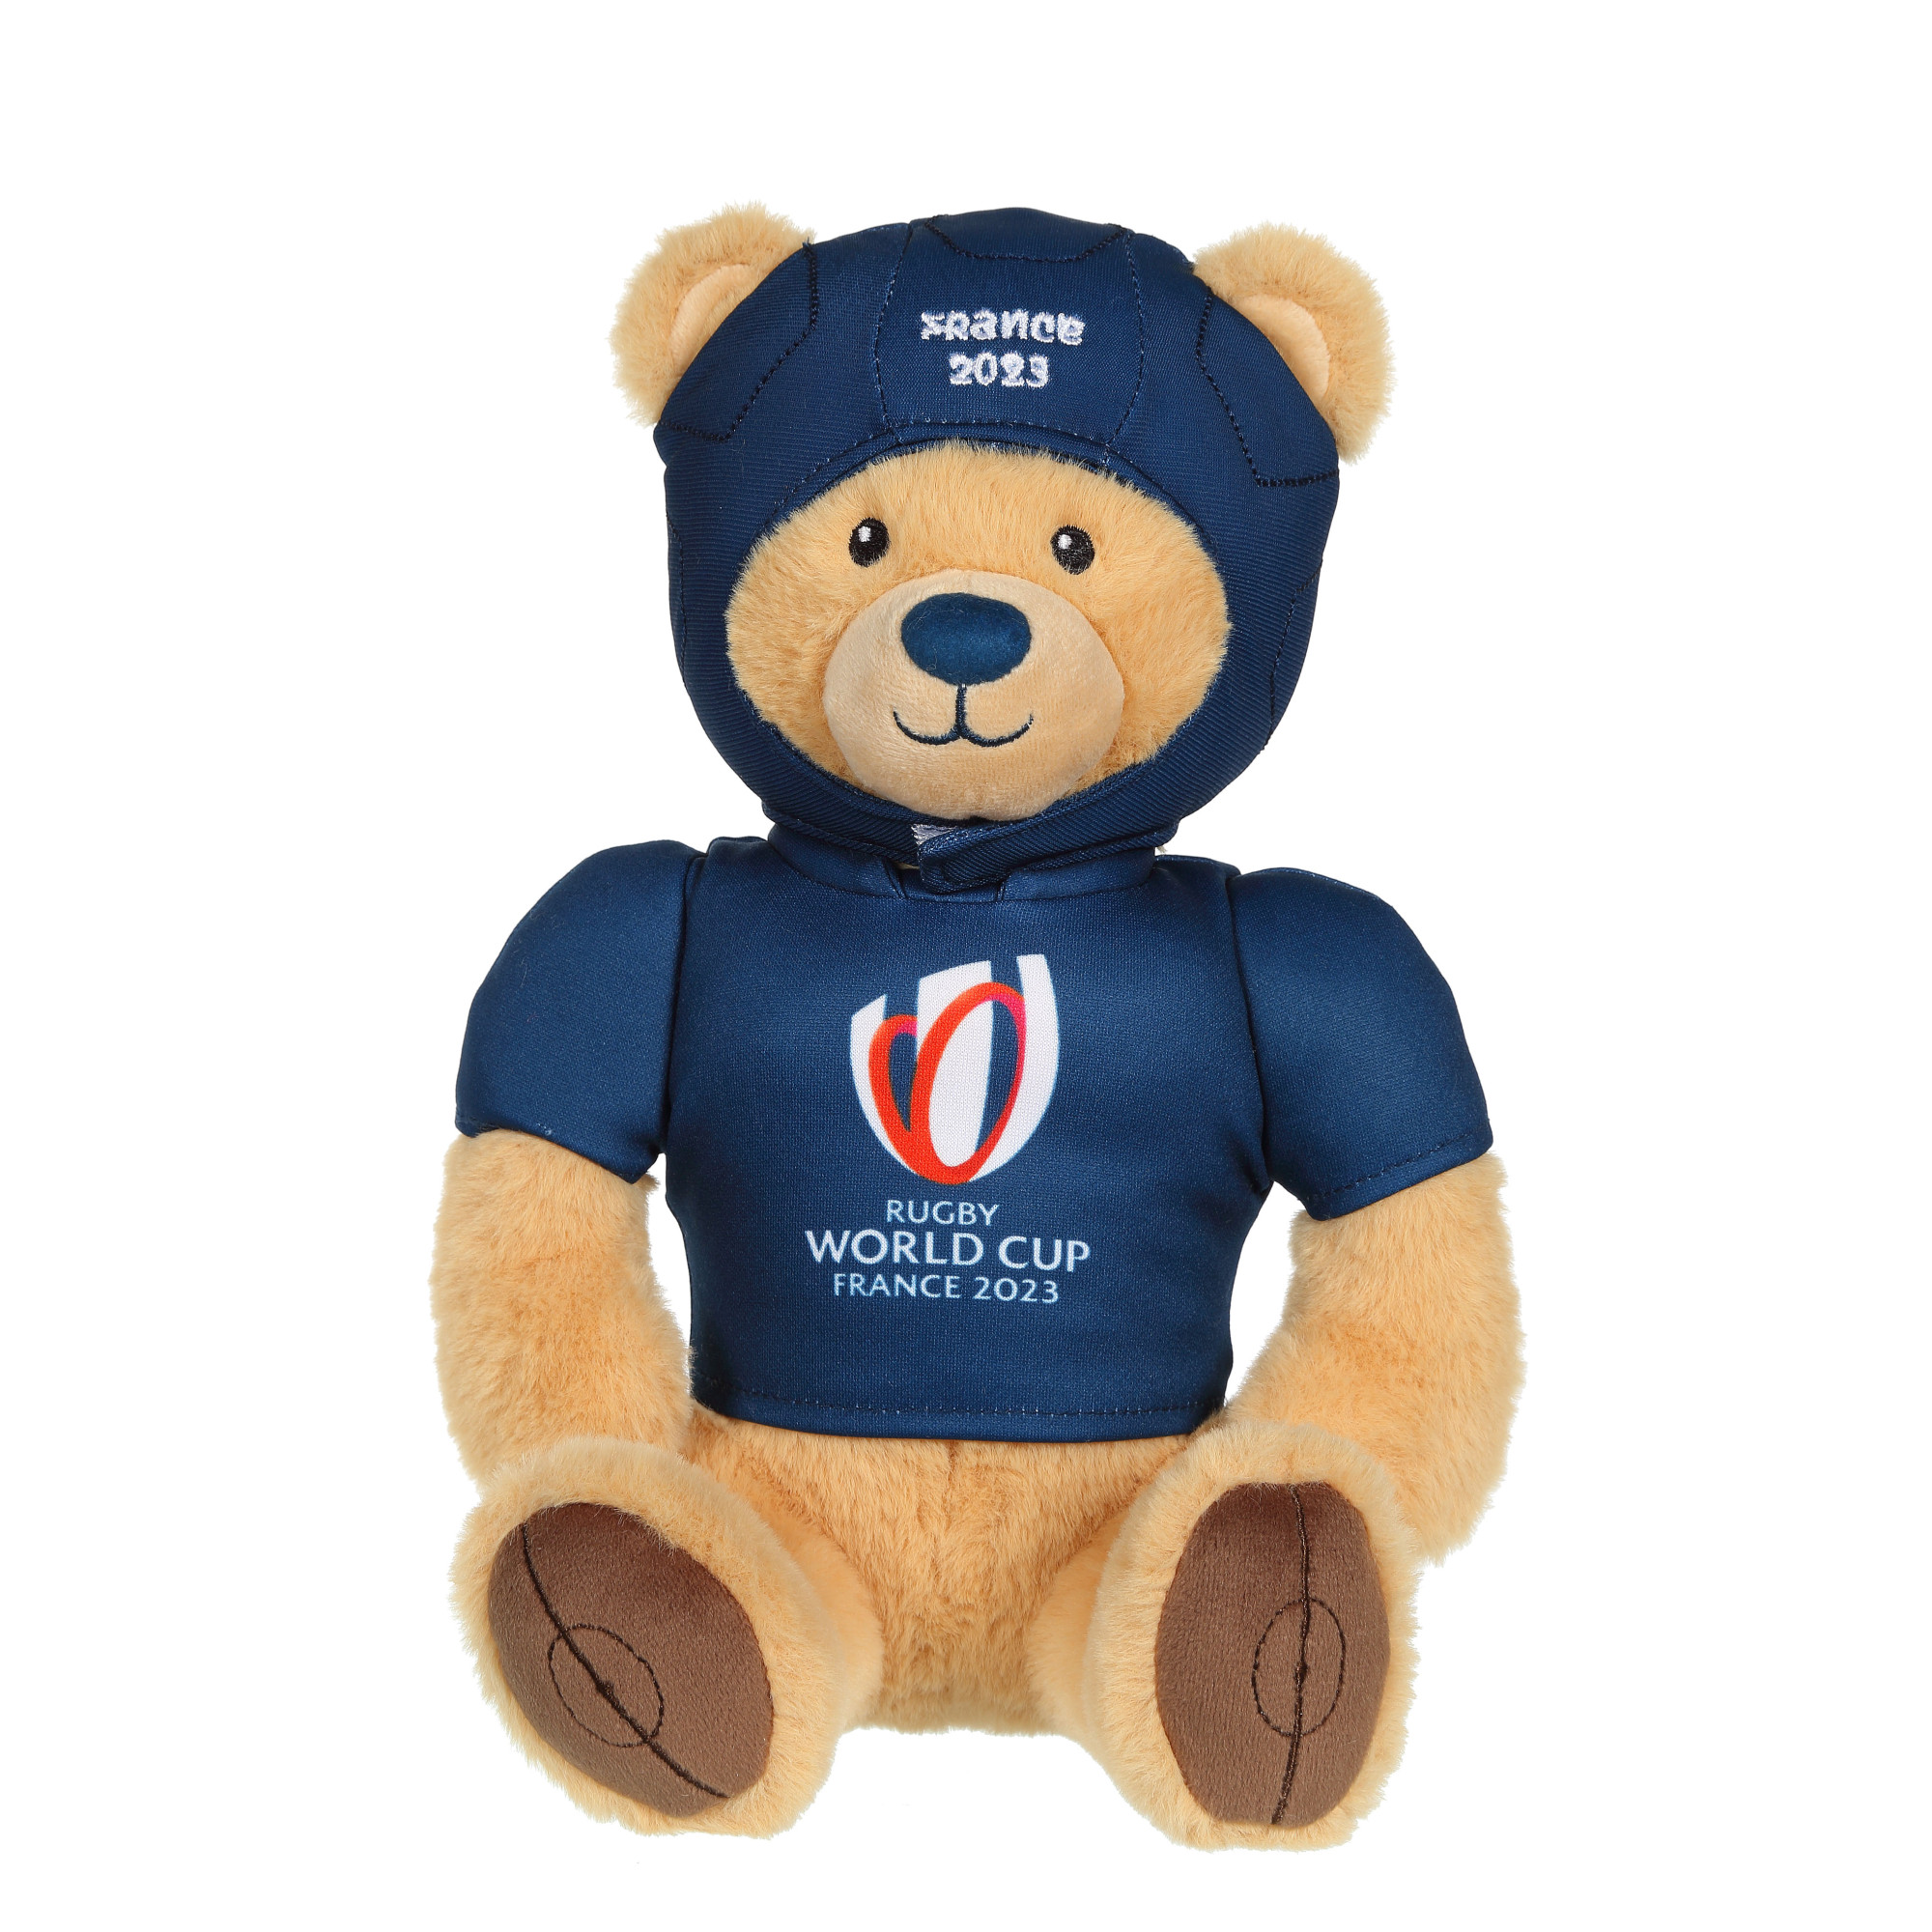 Rugby World Cup France 2023 (RWC) Bear Soft Toy - Official Licensed Soft Toy - 30 cm Sitting